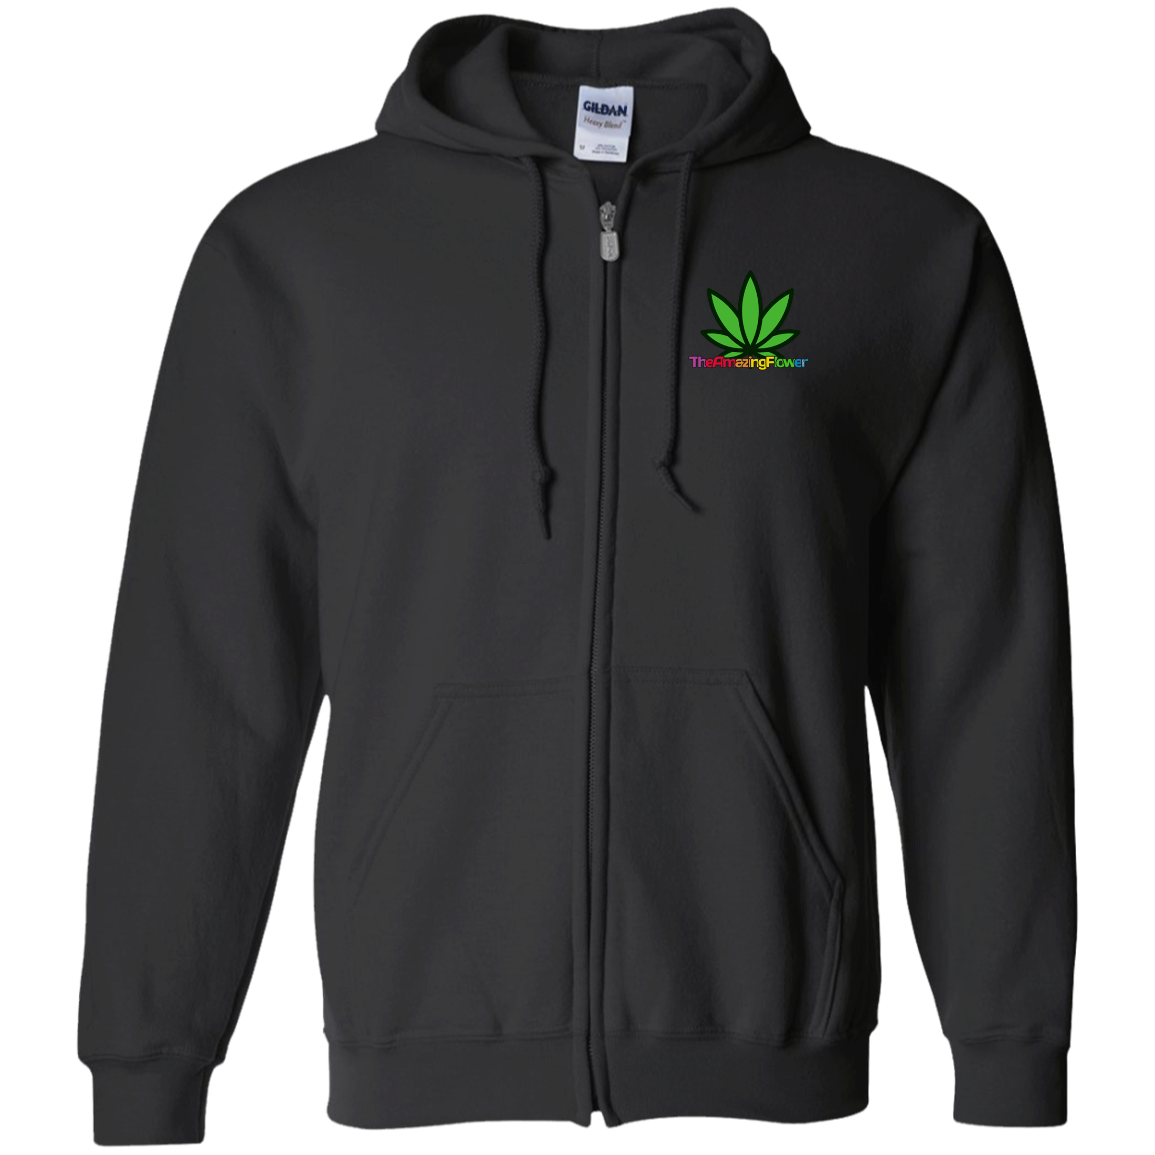 Hemp Leaf Logo + Rainbow Back Zip Up Hoodie from TheAmazxingFlower.com front view (Black only)